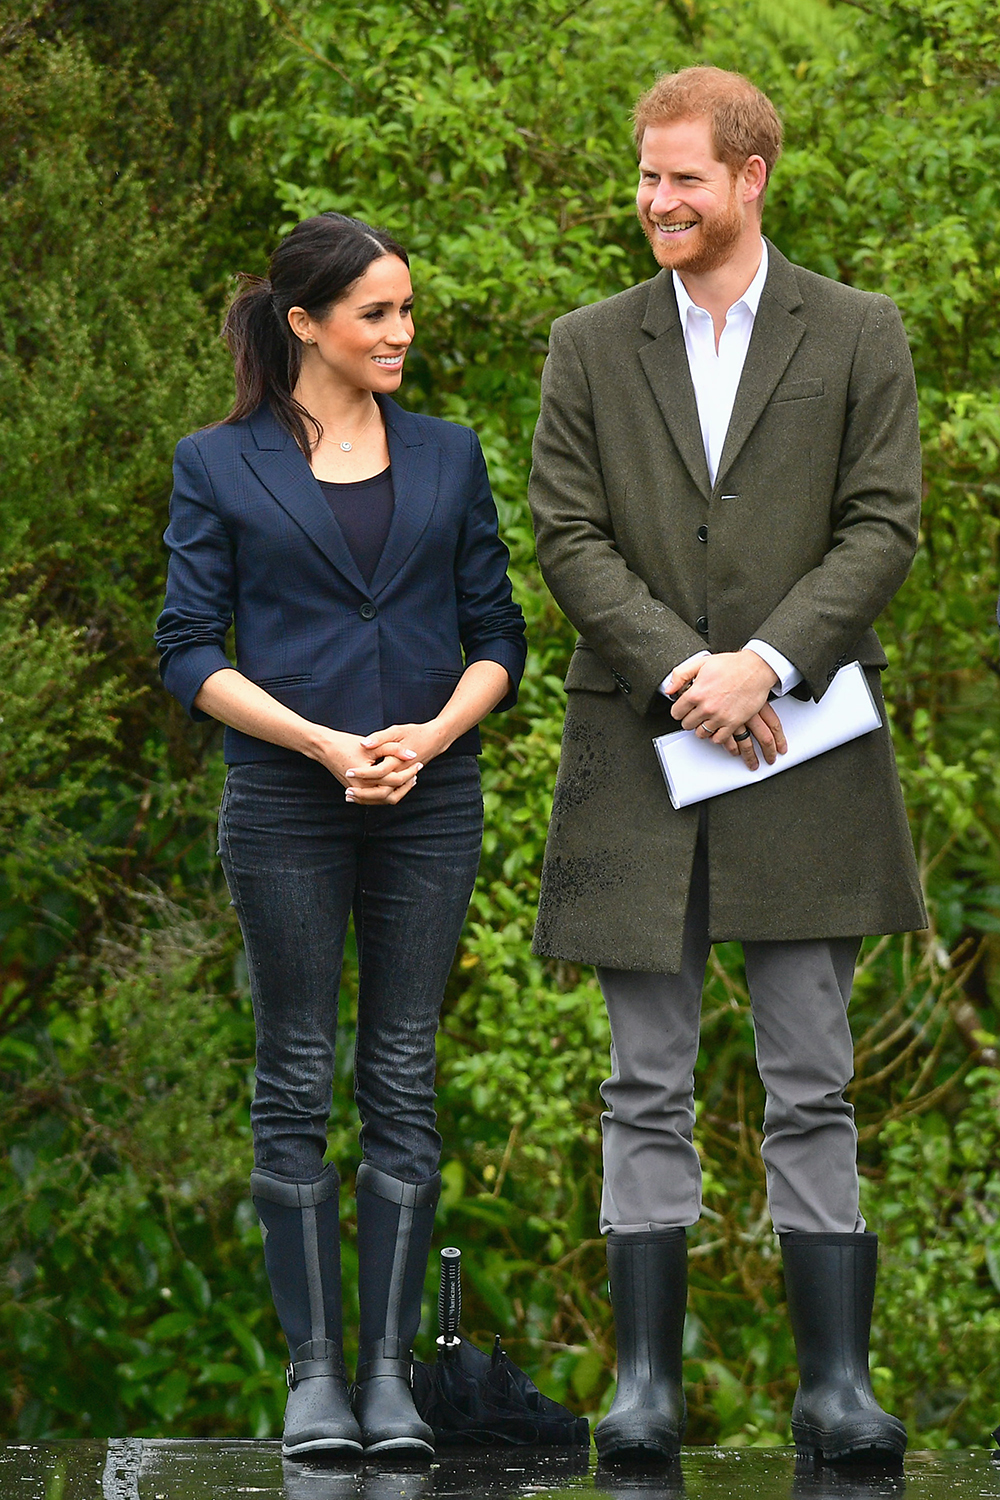 REDVALE, NEW ZEALAND - OCTOBER 30: Prince Harry, Duke of Sussex and Meghan, Duchess of Sussex attend the Unveiling of The Queen's Commonwealth Canopy on October 30, 2018 in Redvale, New Zealand. The Duke and Duchess of Sussex are on their official 16-day Autumn tour visiting cities in Australia, Fiji, Tonga and New Zealand. (Photo by Samir Hussein/Samir Hussein / WireImage)